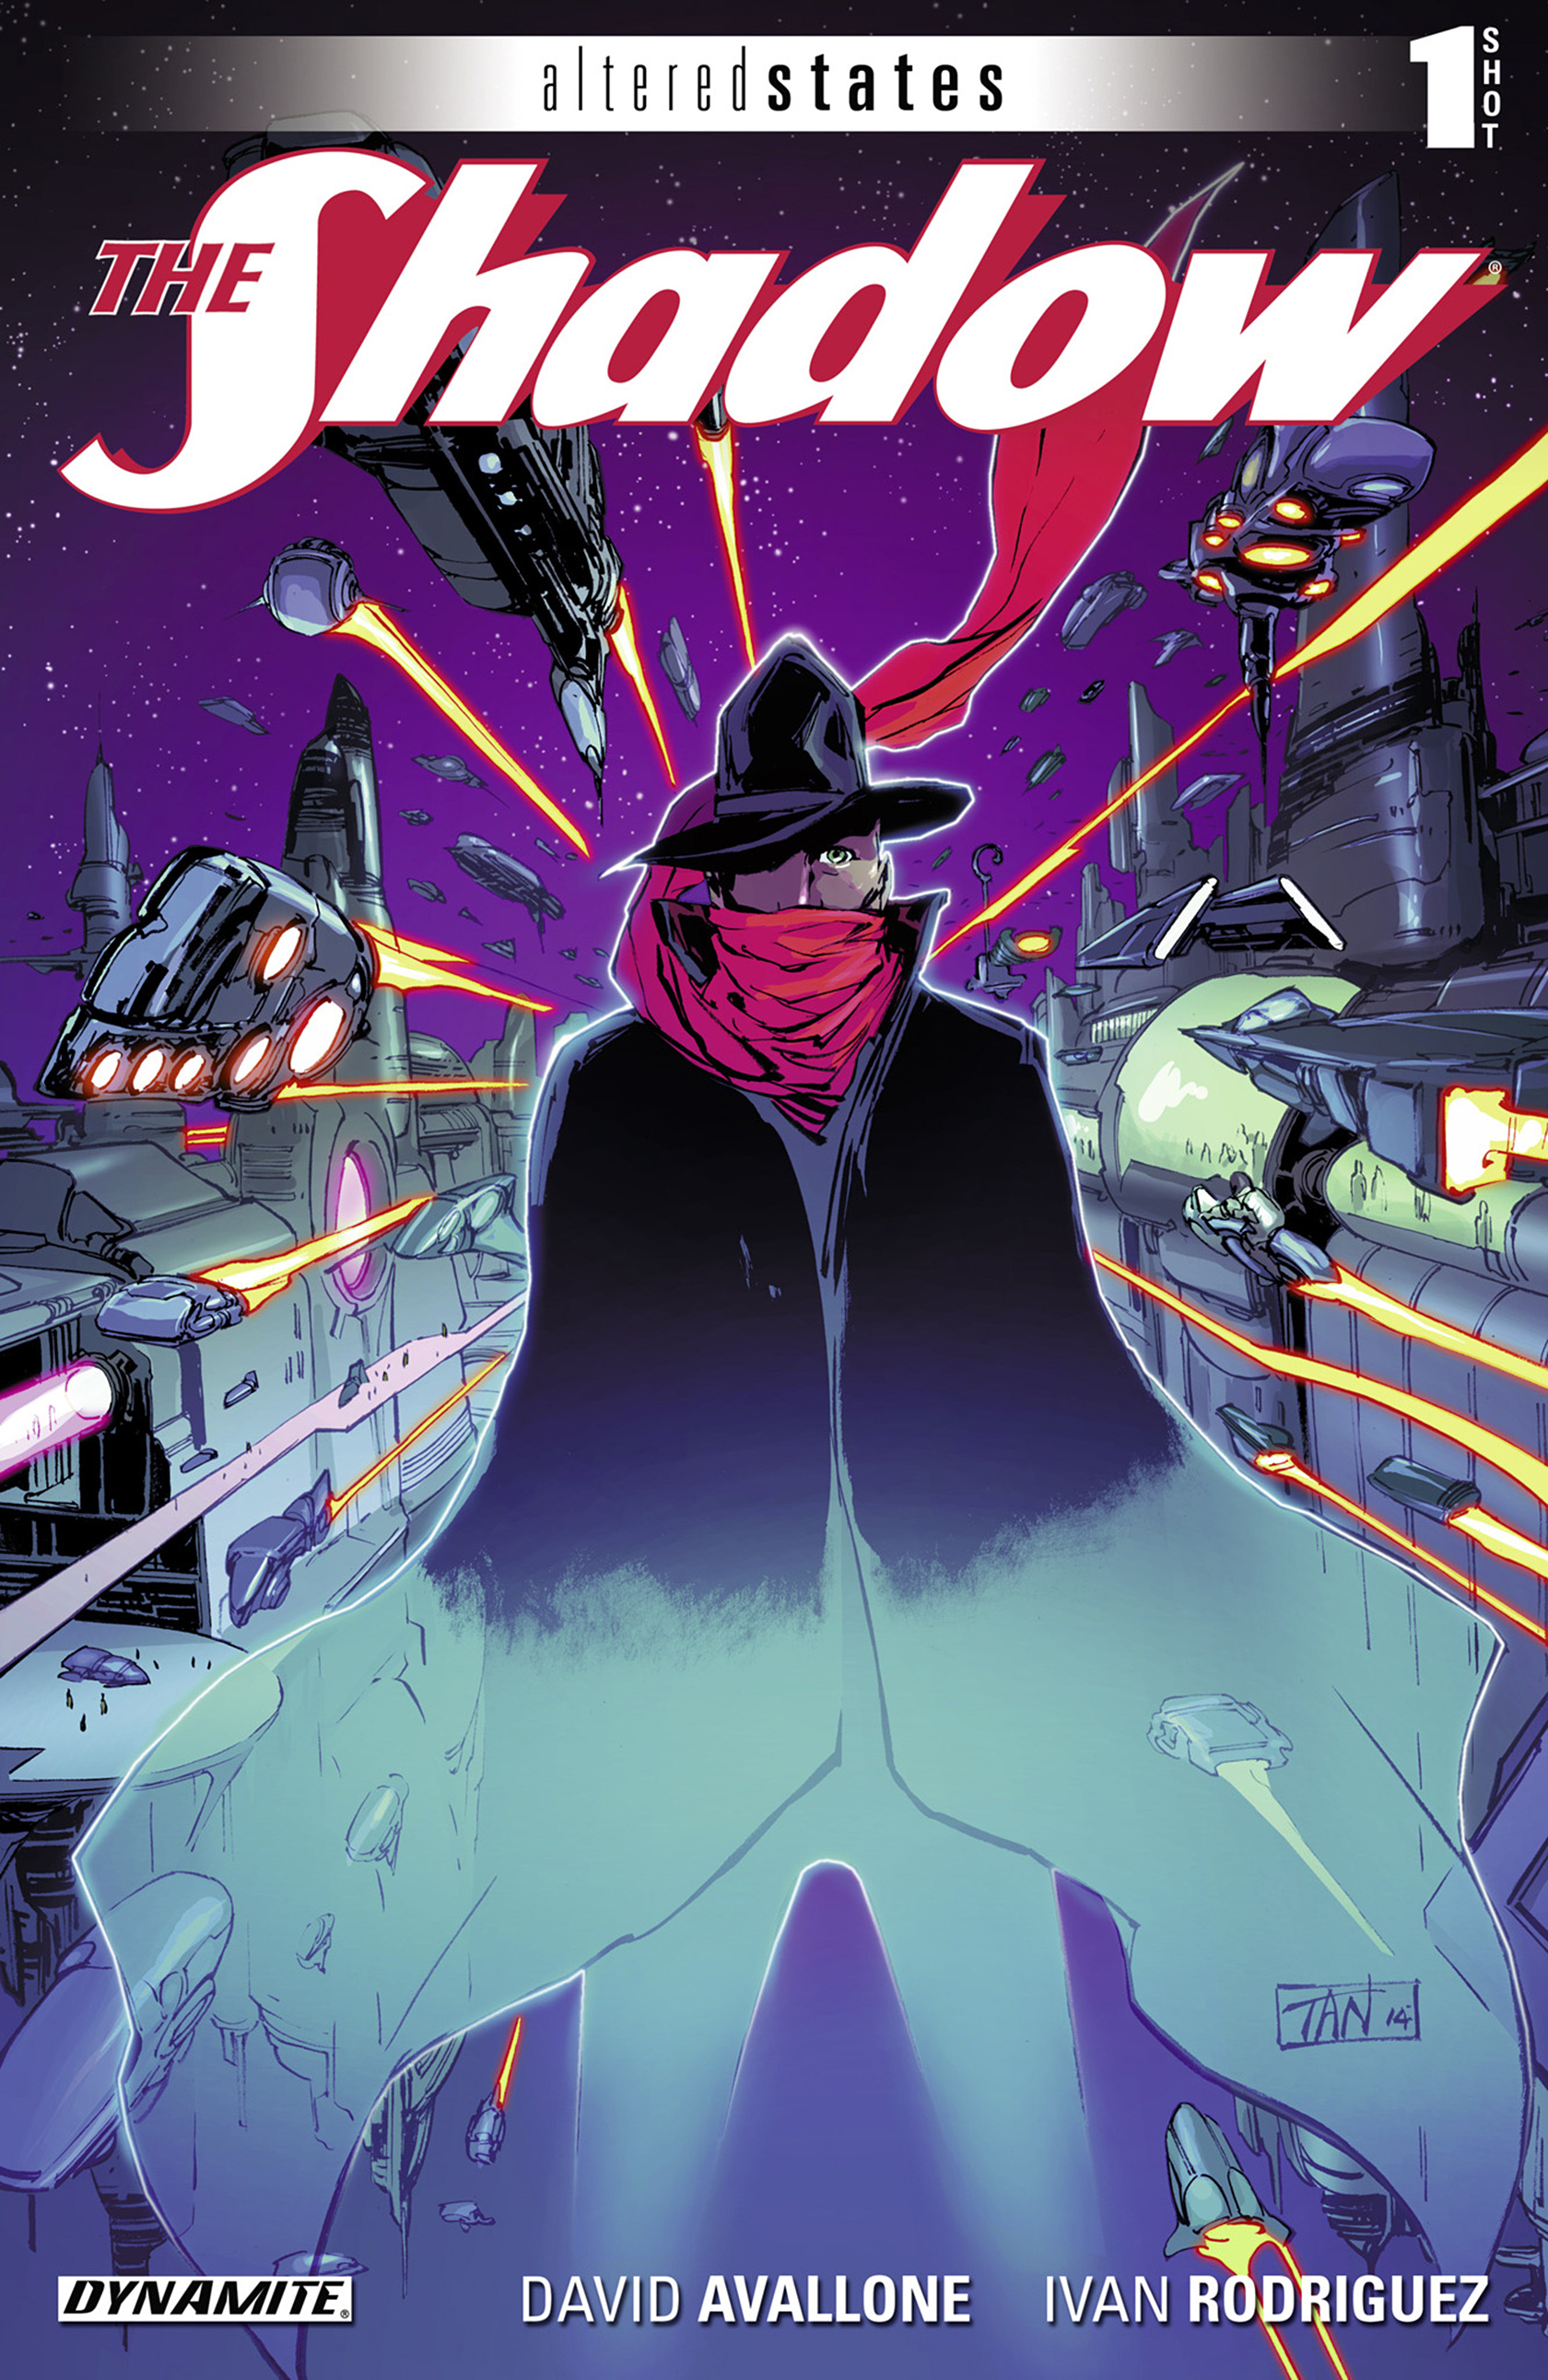 Read online Altered States: The Shadow comic -  Issue # Full - 1